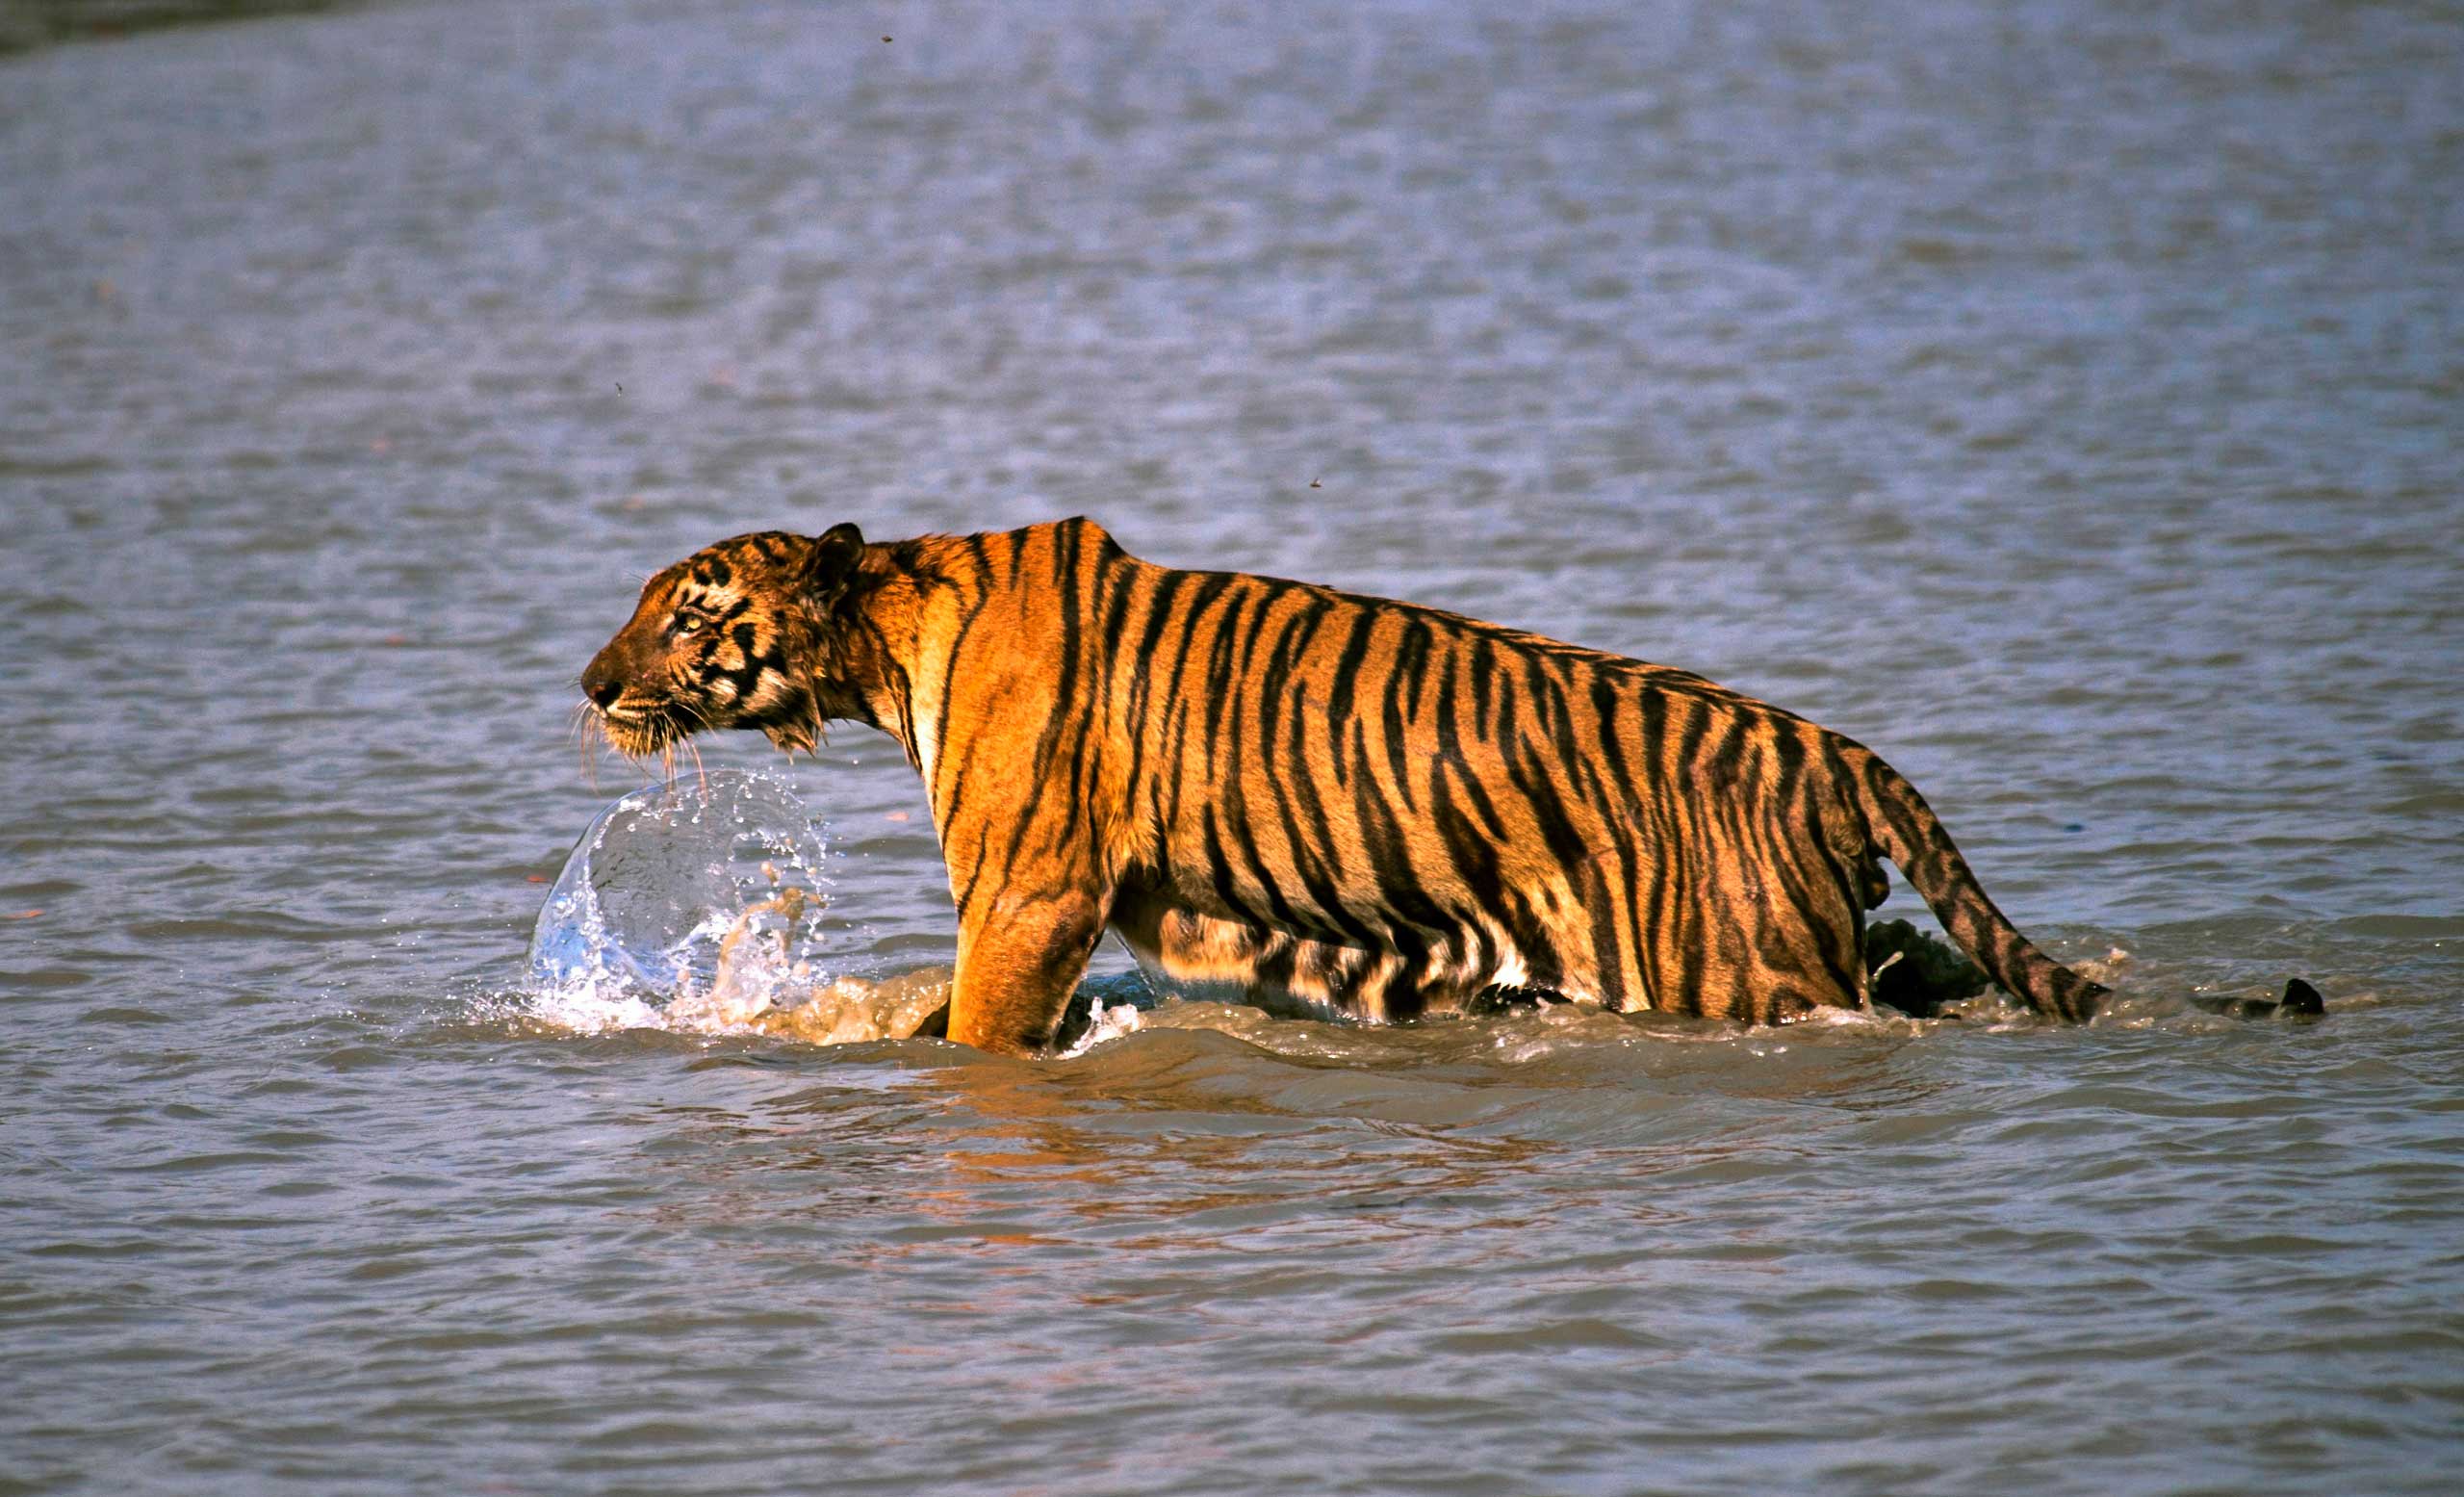 Only 100 Tigers Remain in Bangladesh's Sundarban Forests, Survey Shows |  Time